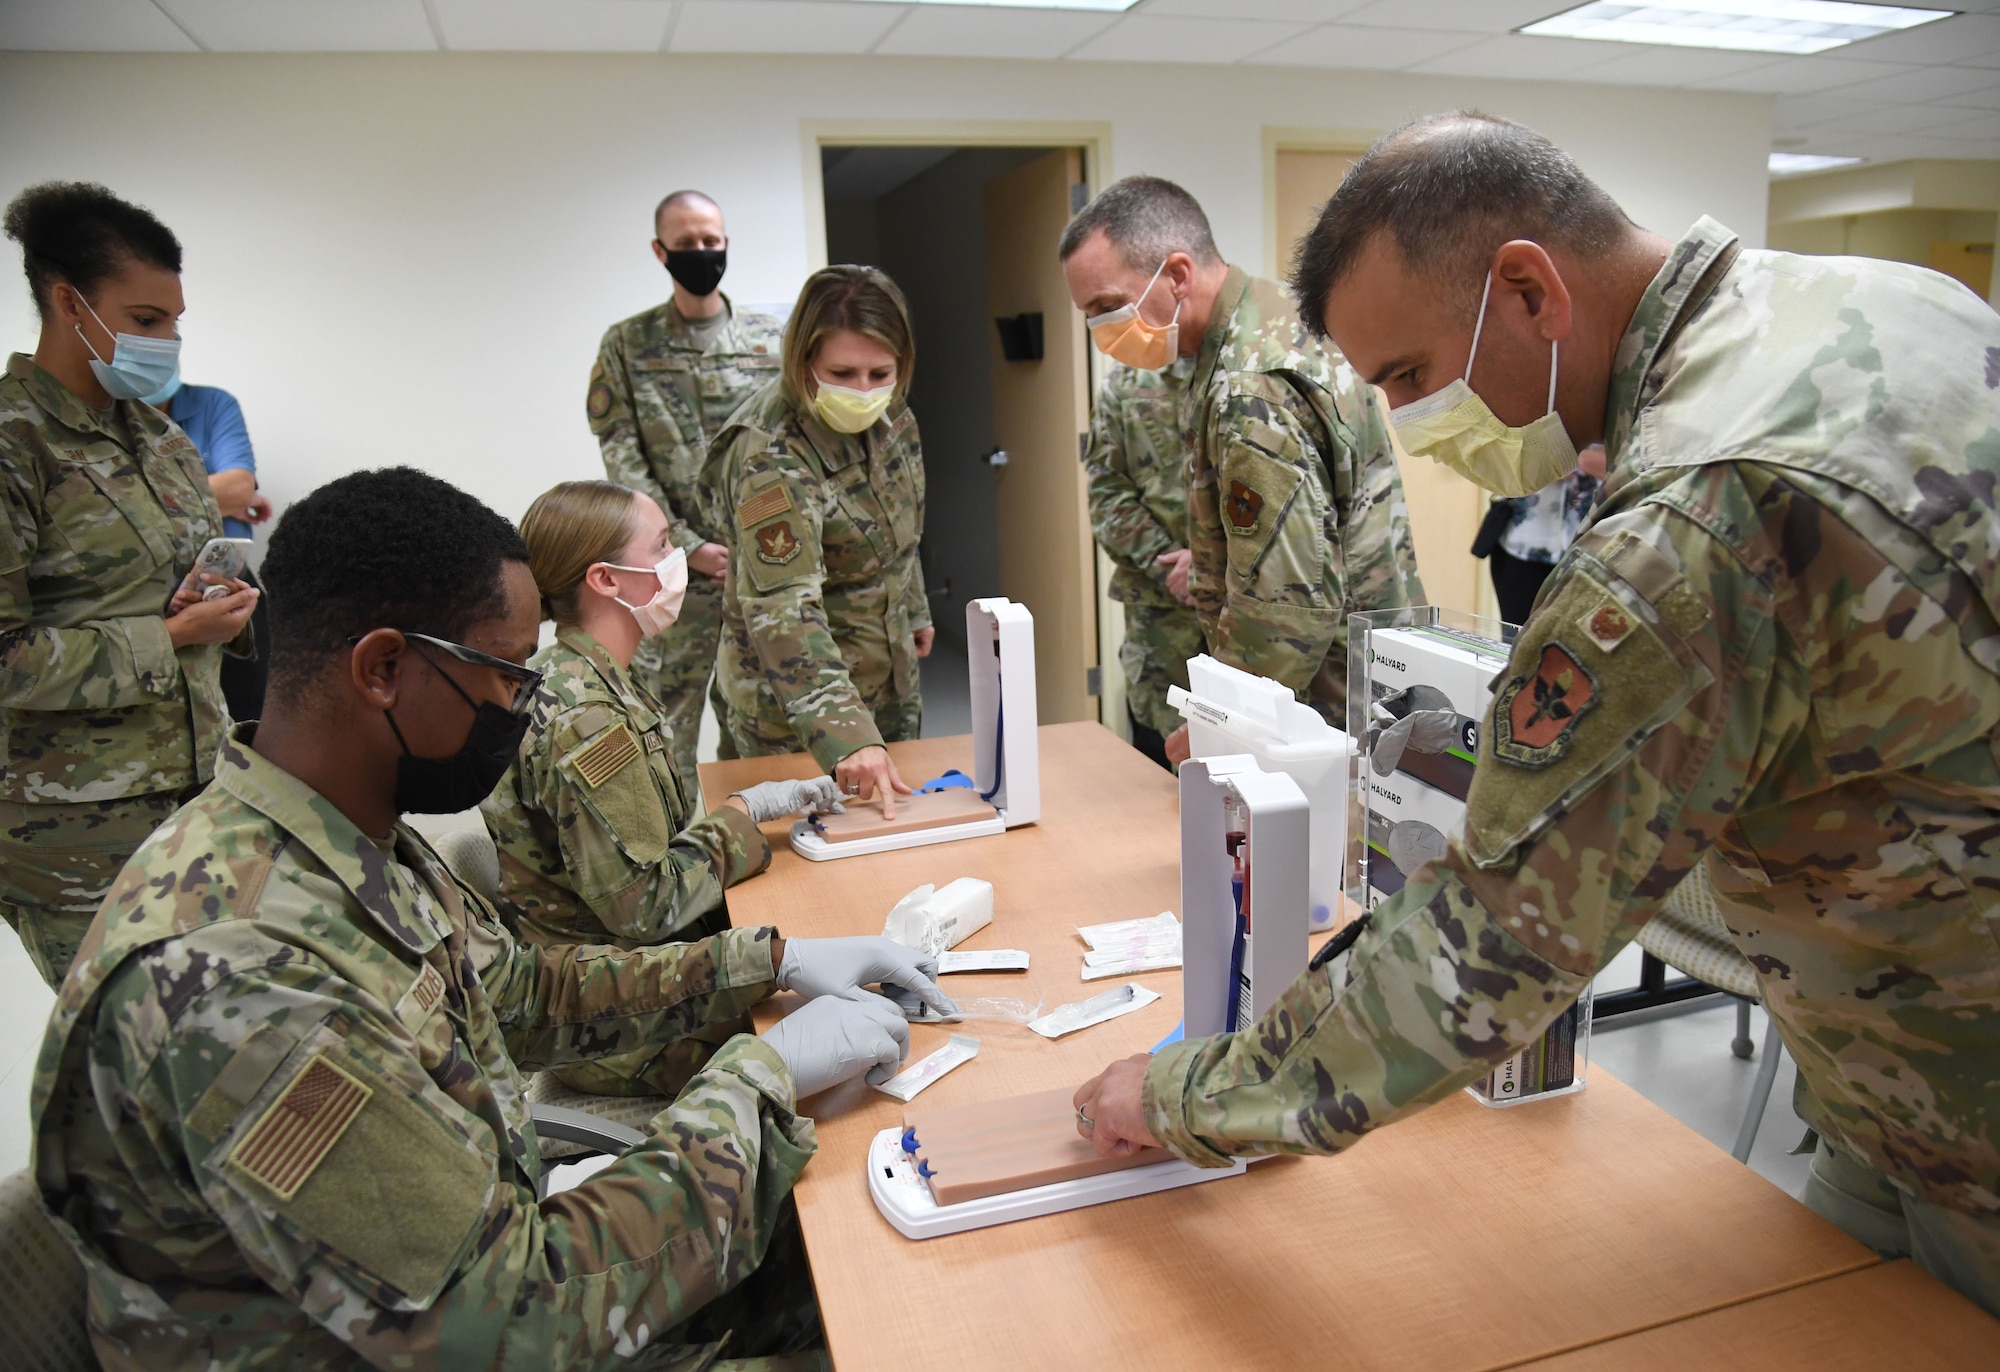 Members of the 81st Medical Group provide an IV training demonstration to Chief Master Sgt. Kathleen McCool, Second Air Force command chief, and Col. Nicholas Dipoma, Second Air Force vice commander, during an immersion tour inside the Keesler Medical Center at Keesler Air Force Base, Mississippi, July 29, 2022. The tour also included the 334th Training Squadron air traffic control simulator and the 81st Medical Group clinical research lab. (U.S. Air Force photo by Kemberly Groue)